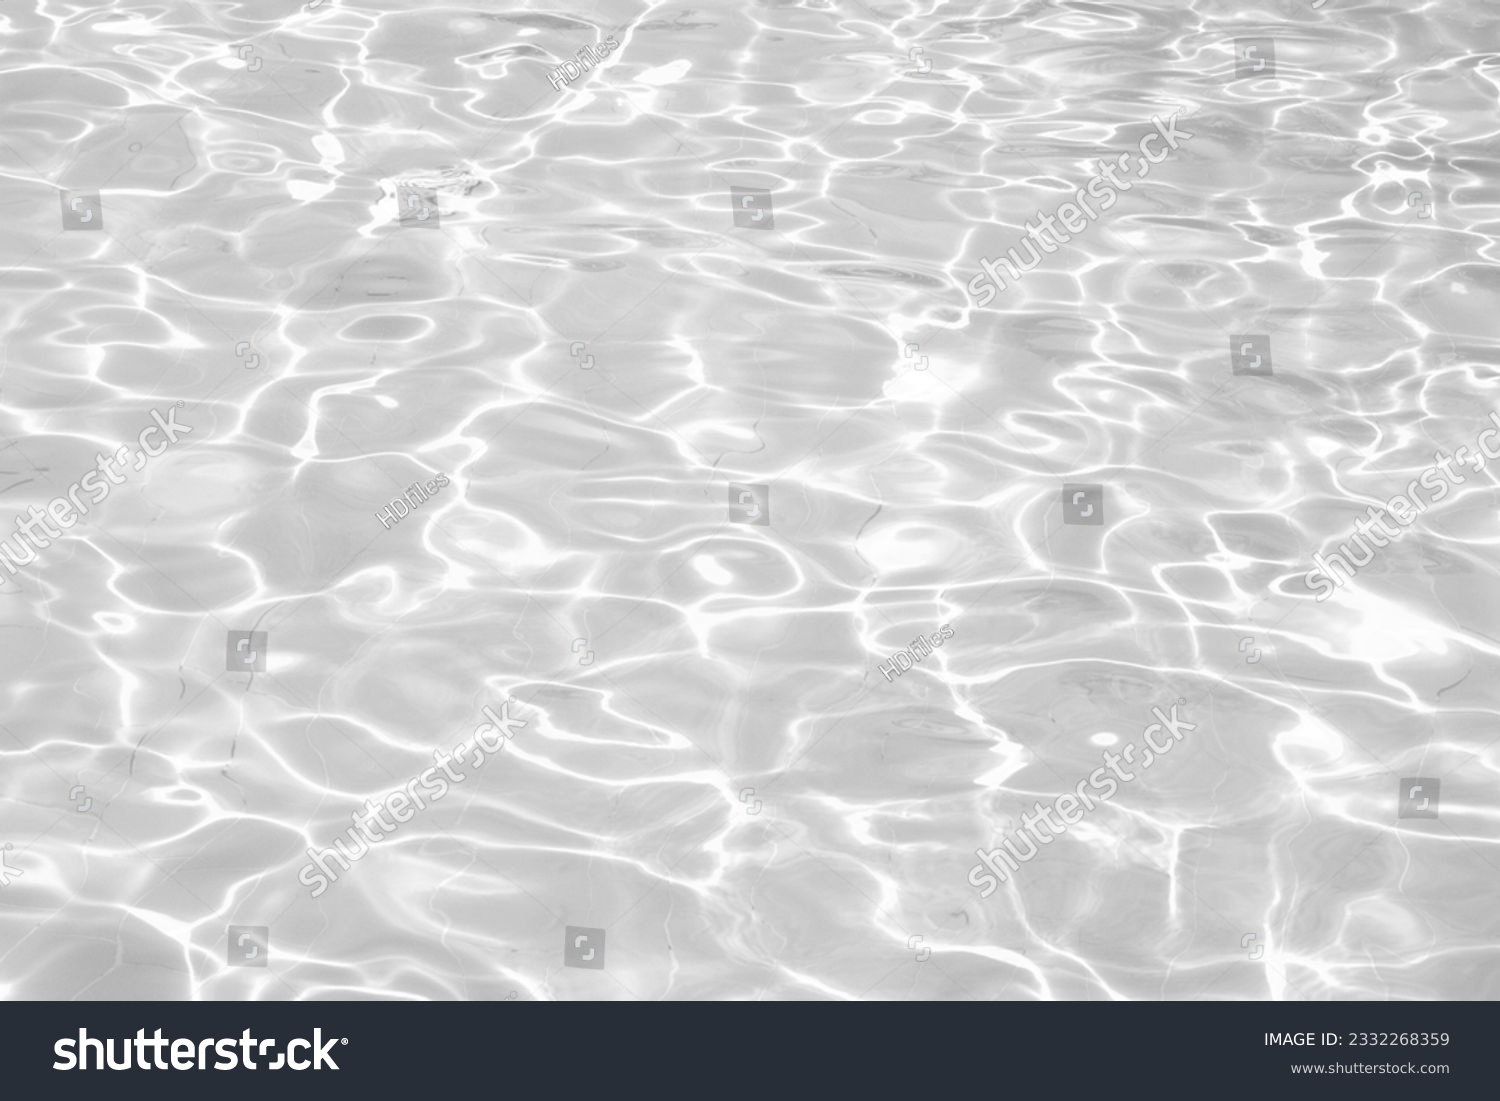 Blurred desaturated transparent clear calm water surface texture with splashes and bubbles. Trendy abstract nature background. #2332268359